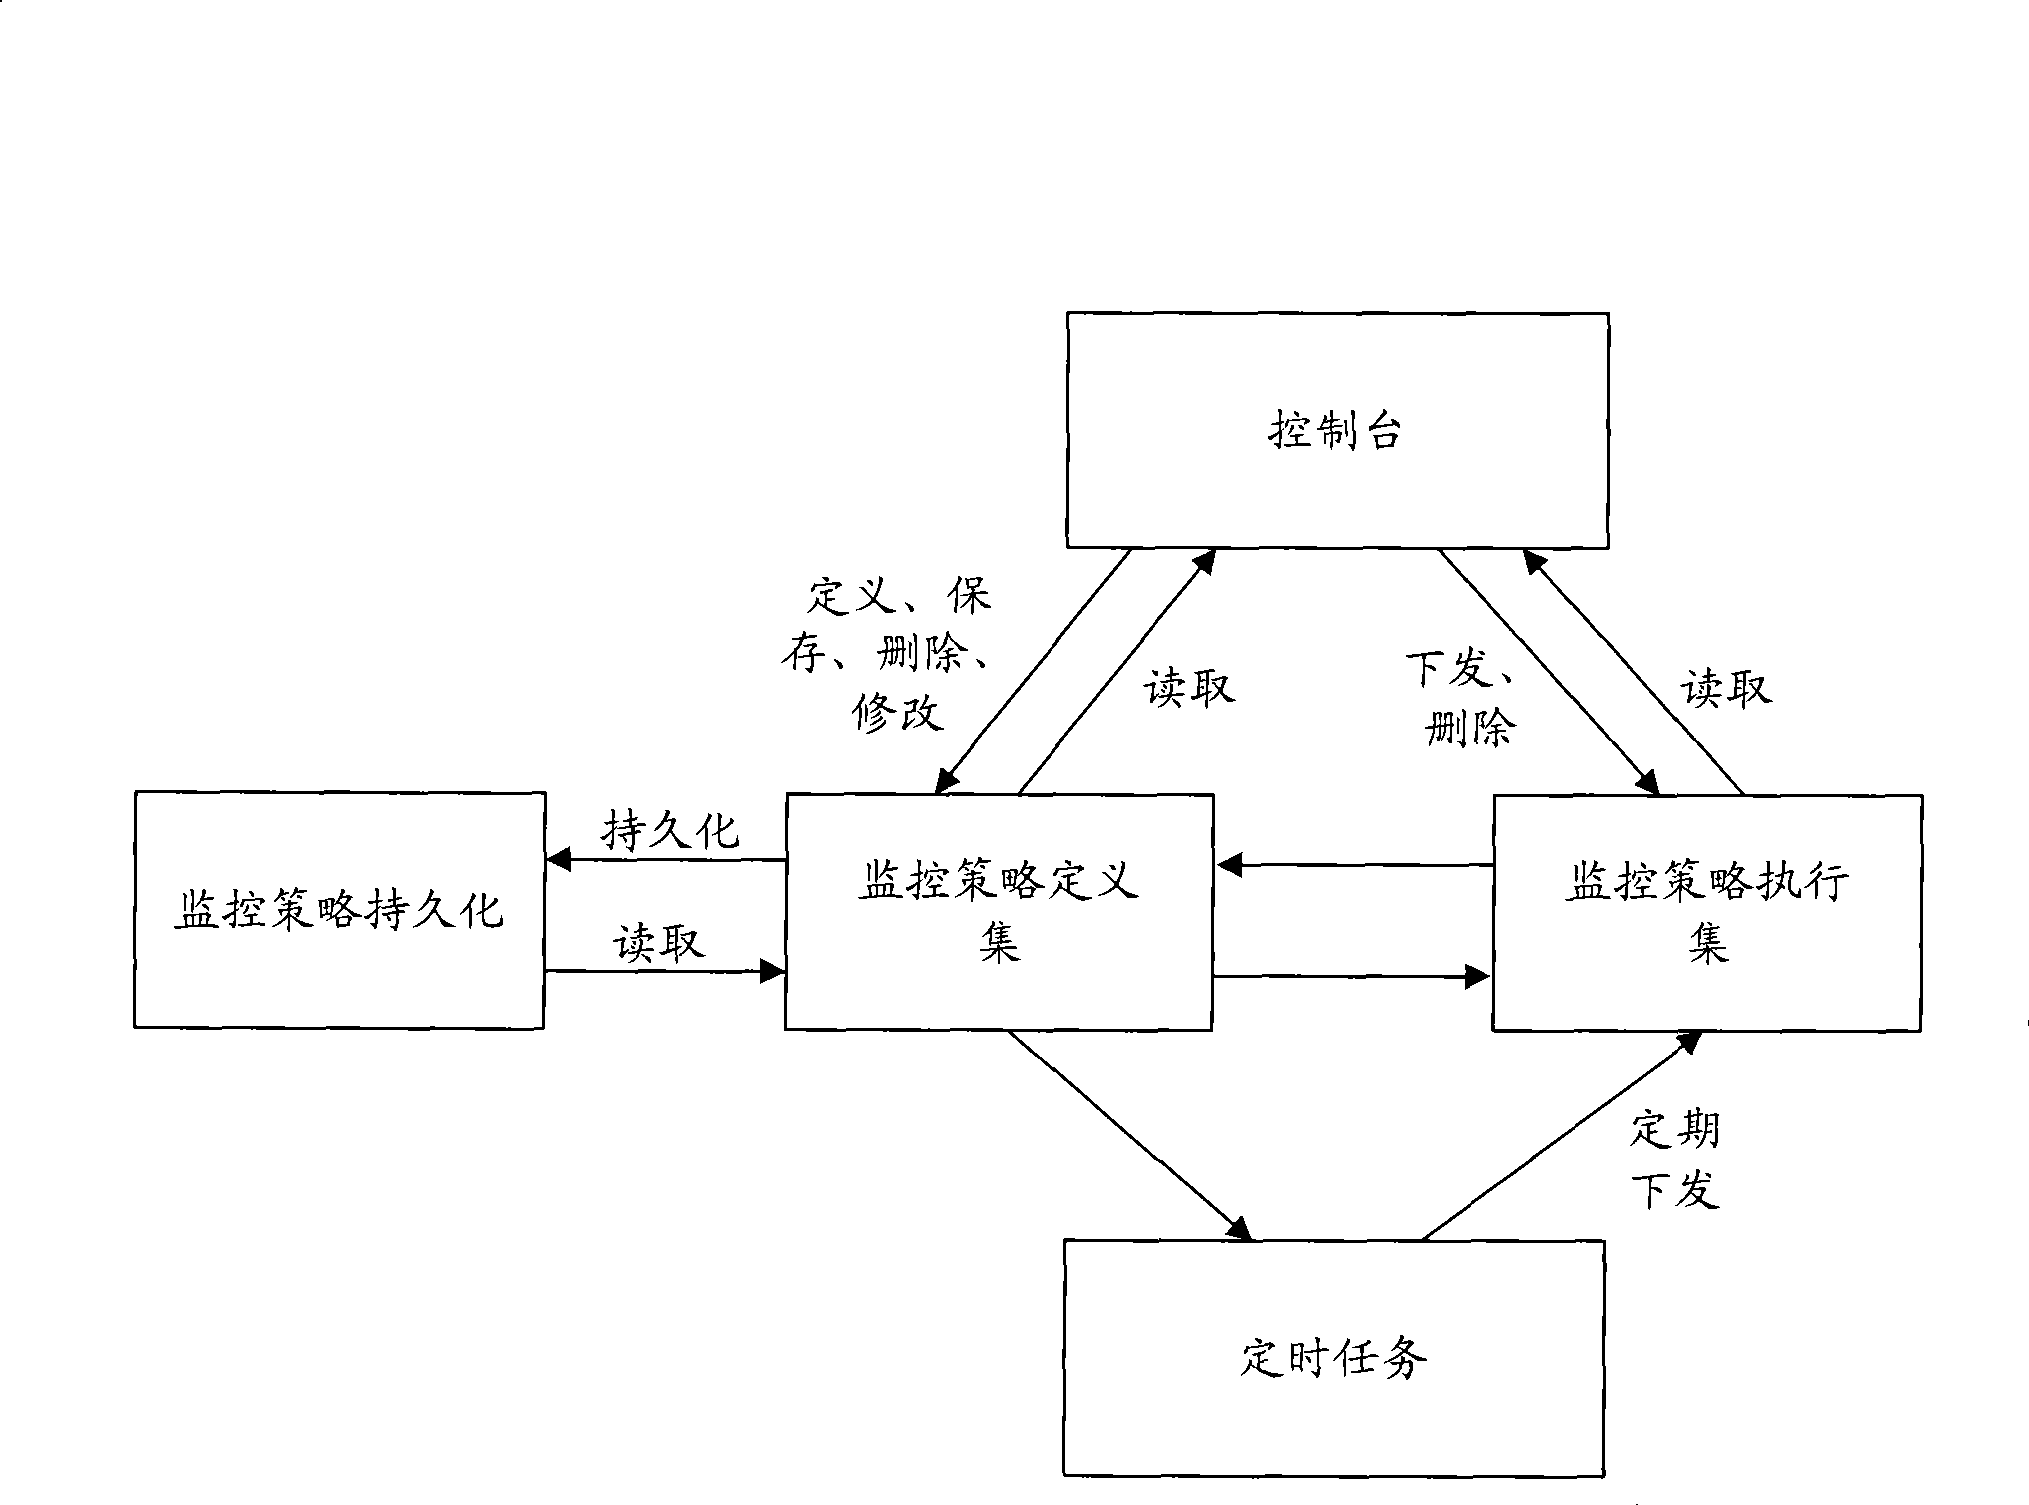 Service monitoring method and system